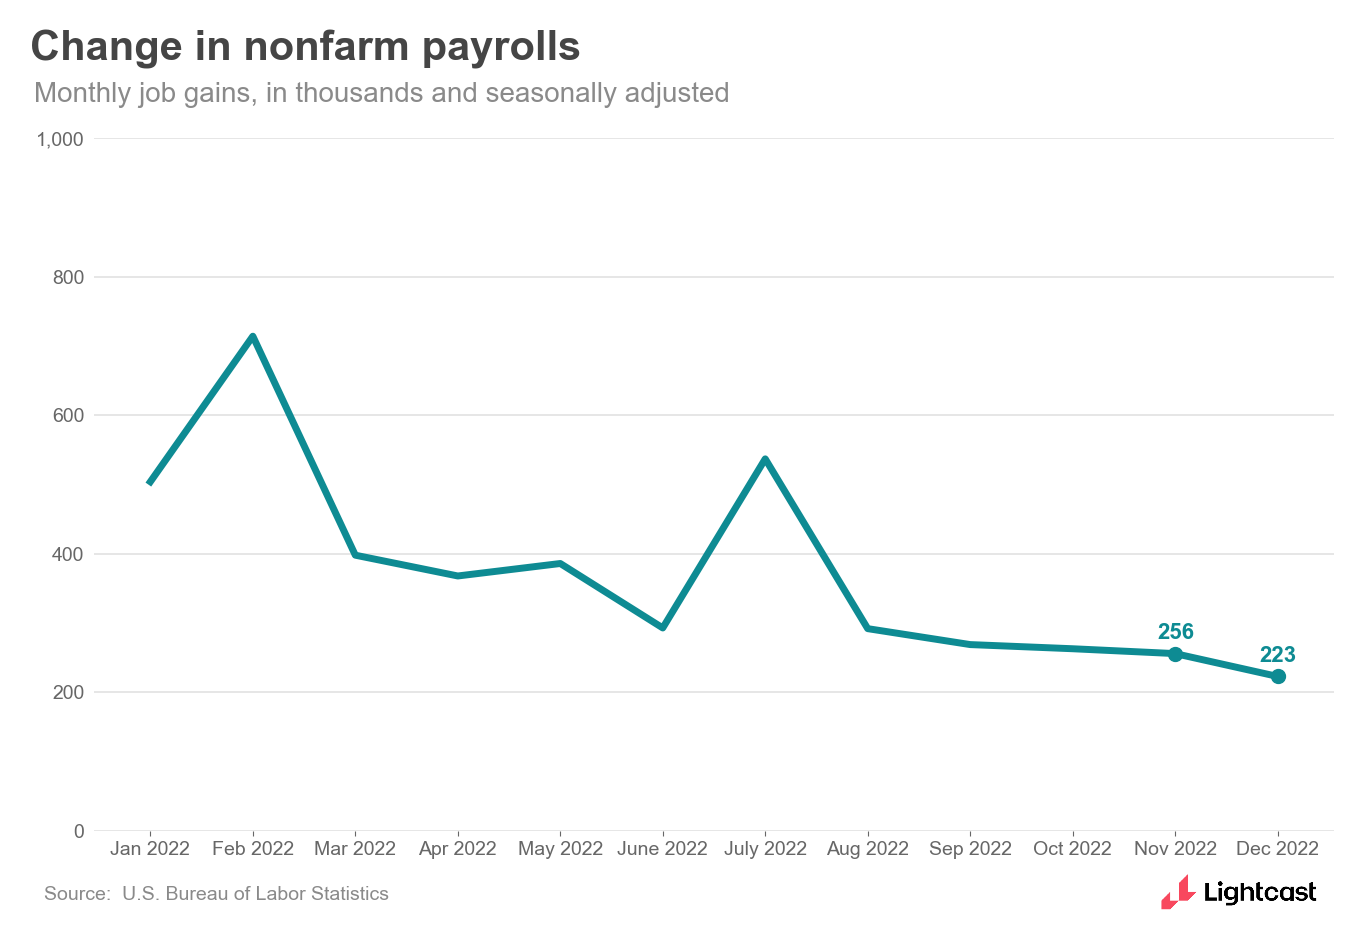 Change in total new payroll jobs over time